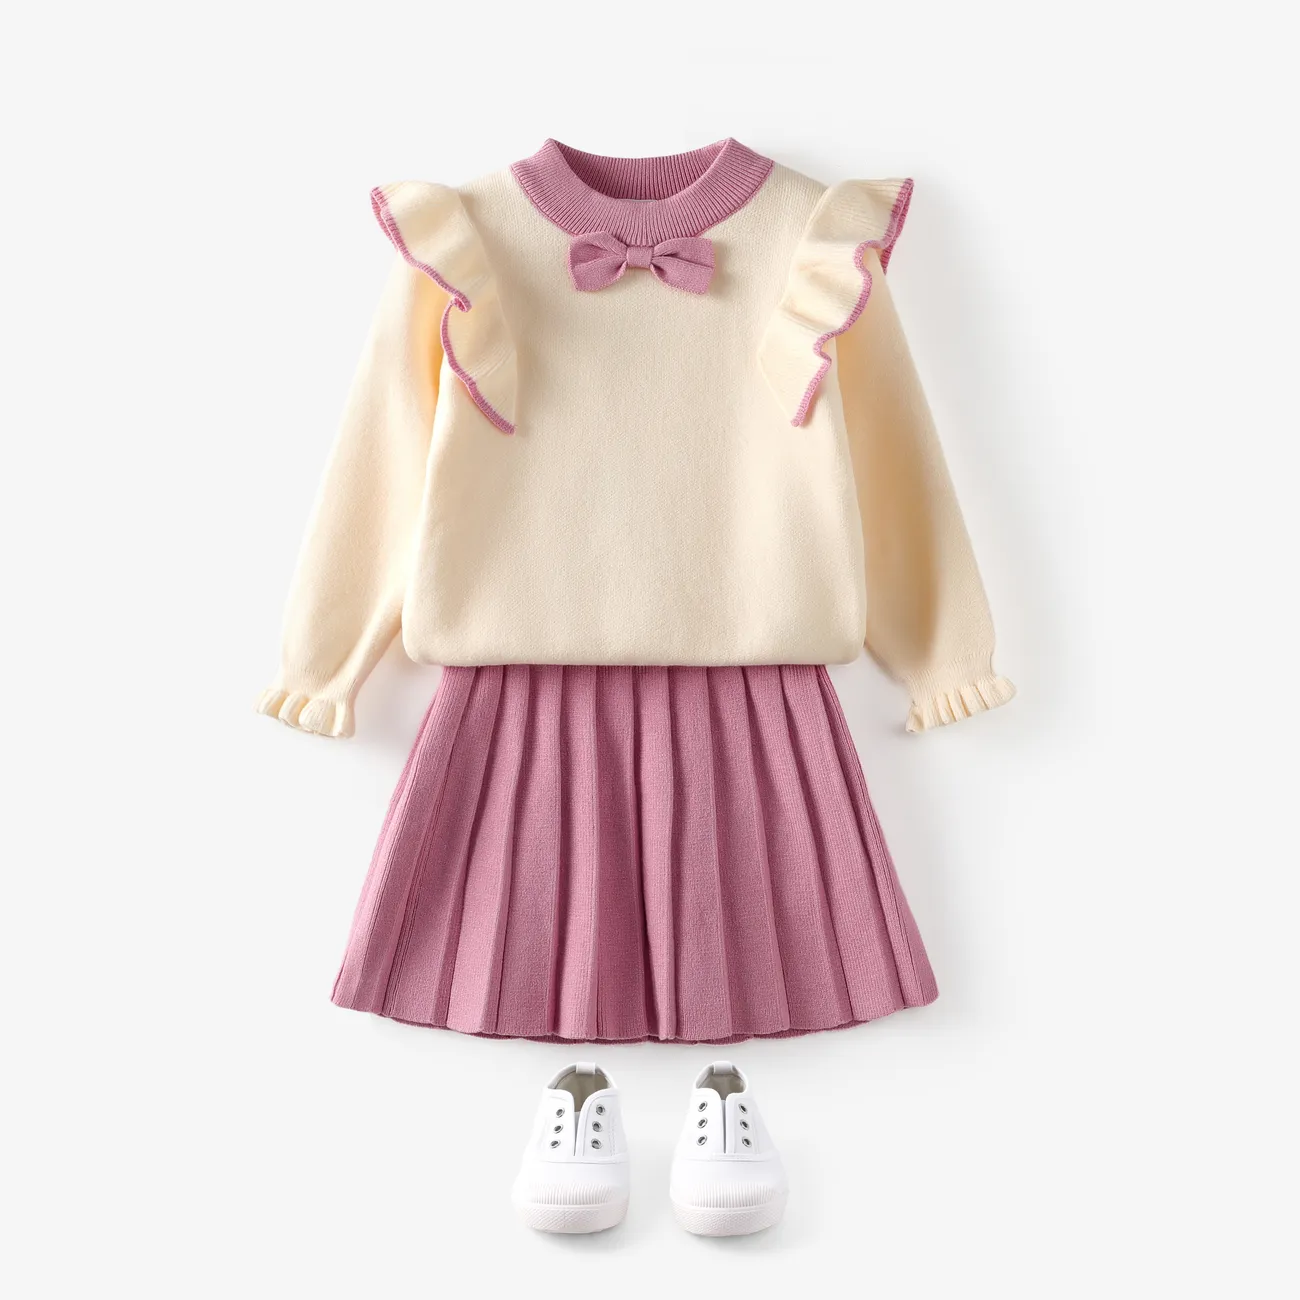 2-piece Toddler Girl Bowknot Flounced Knitted Sweater and Pleated Skirt Set Pink big image 1